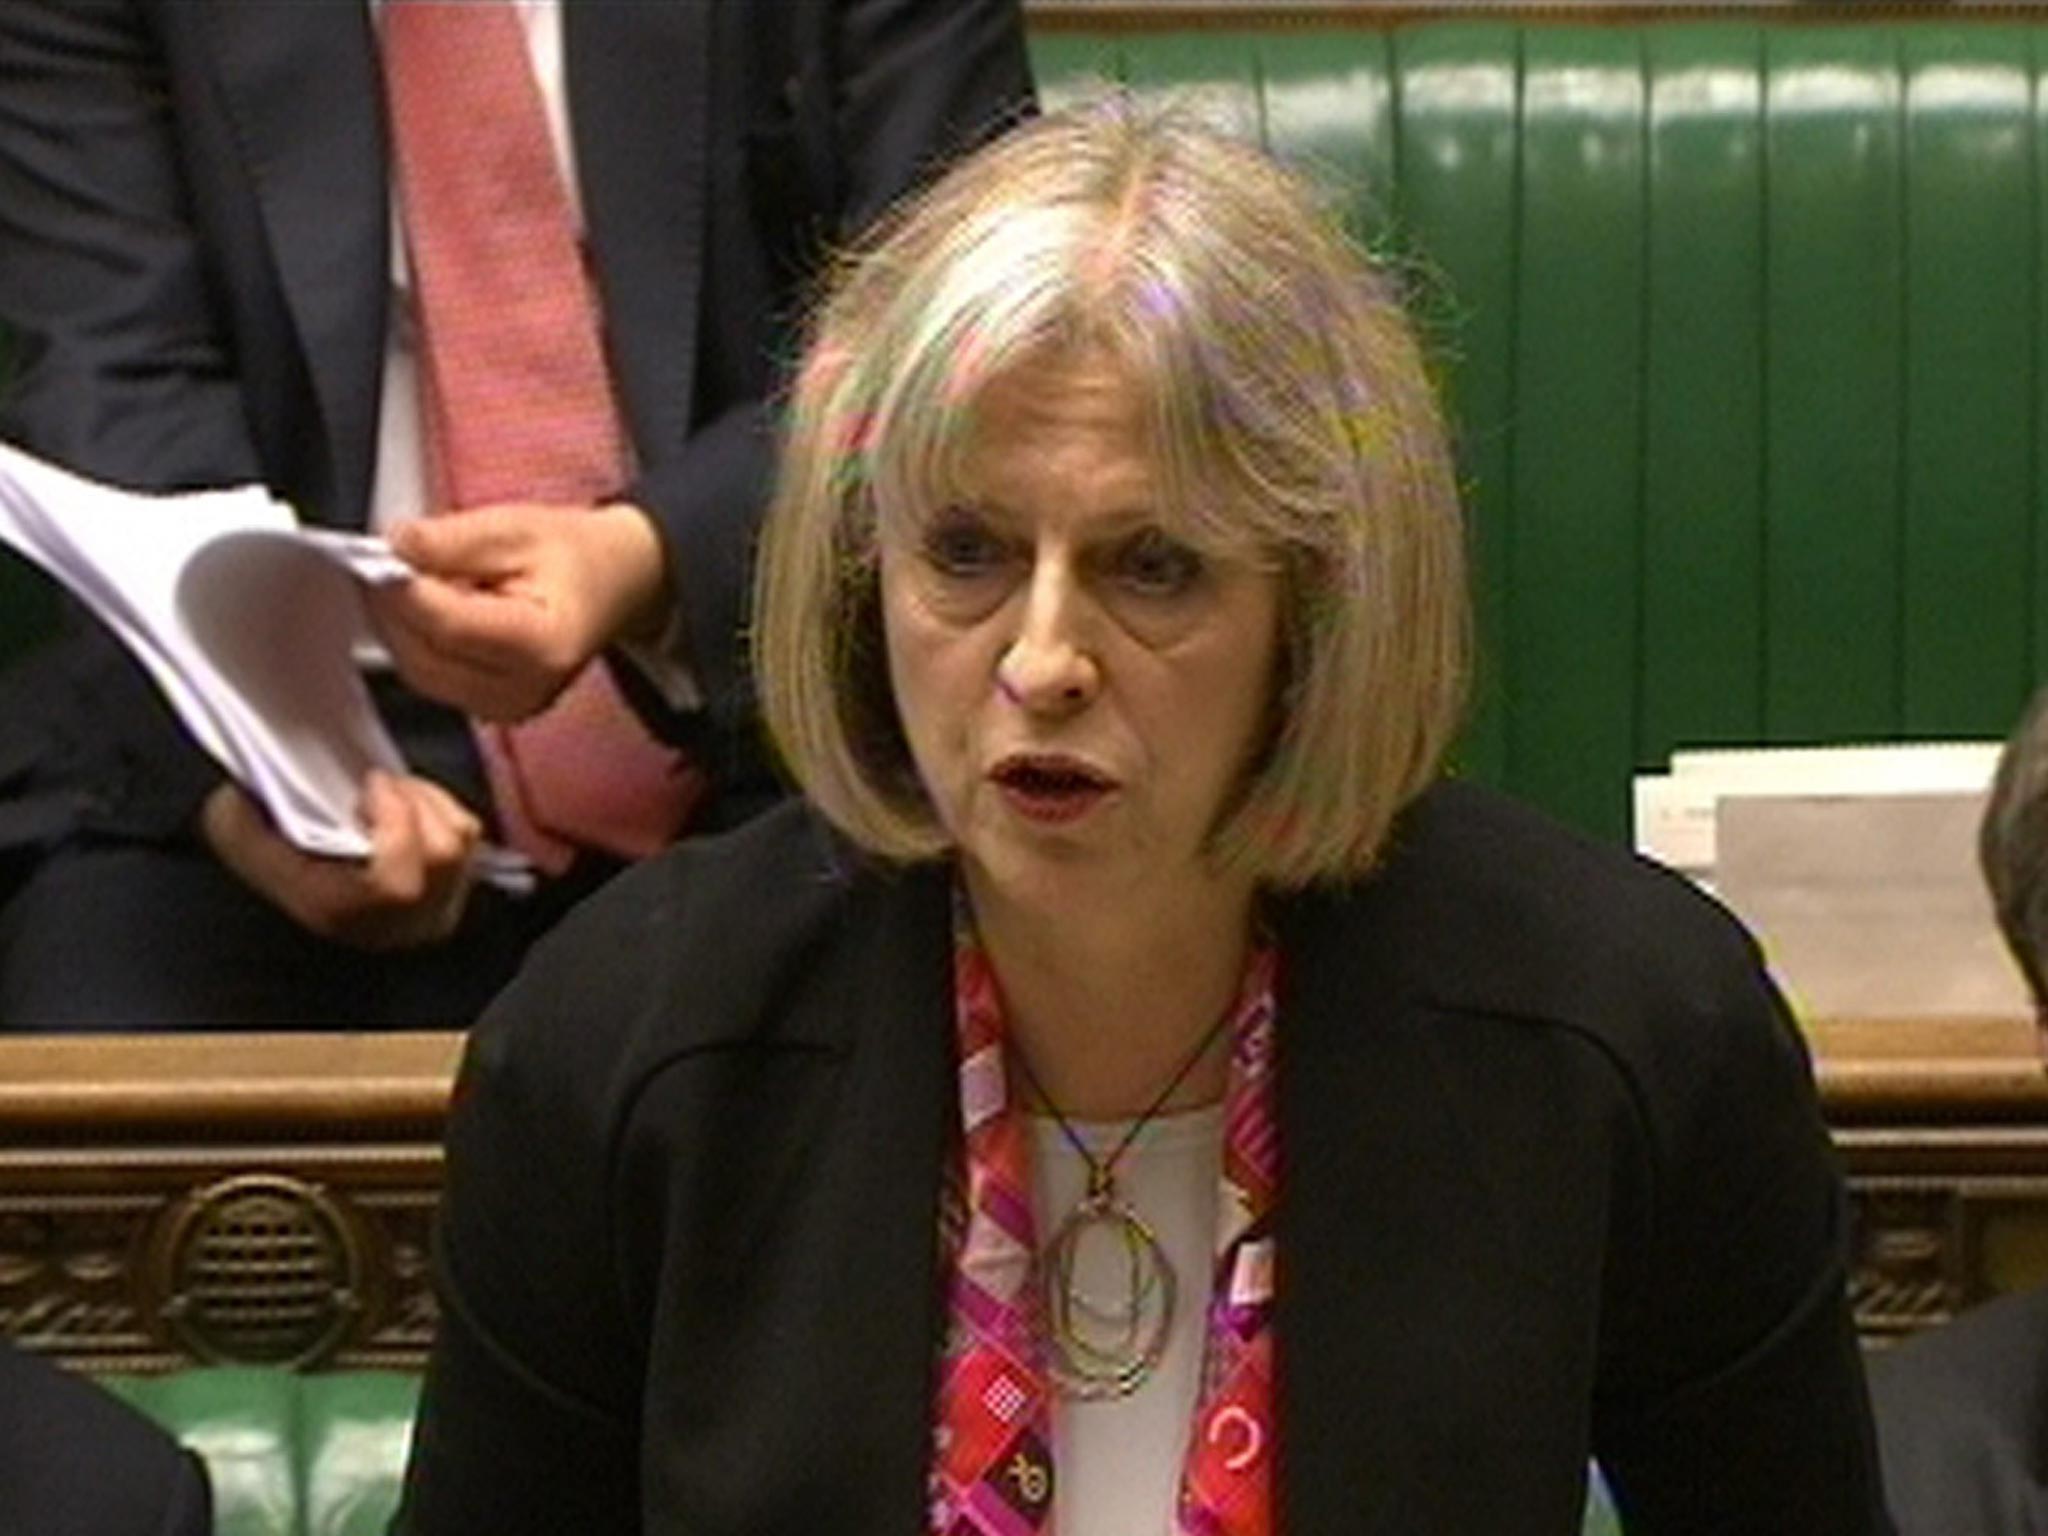 Theresa May giving a statement to MPs following the publication of the report by Mark Ellison QC into the Stephen Lawrence murder investigation